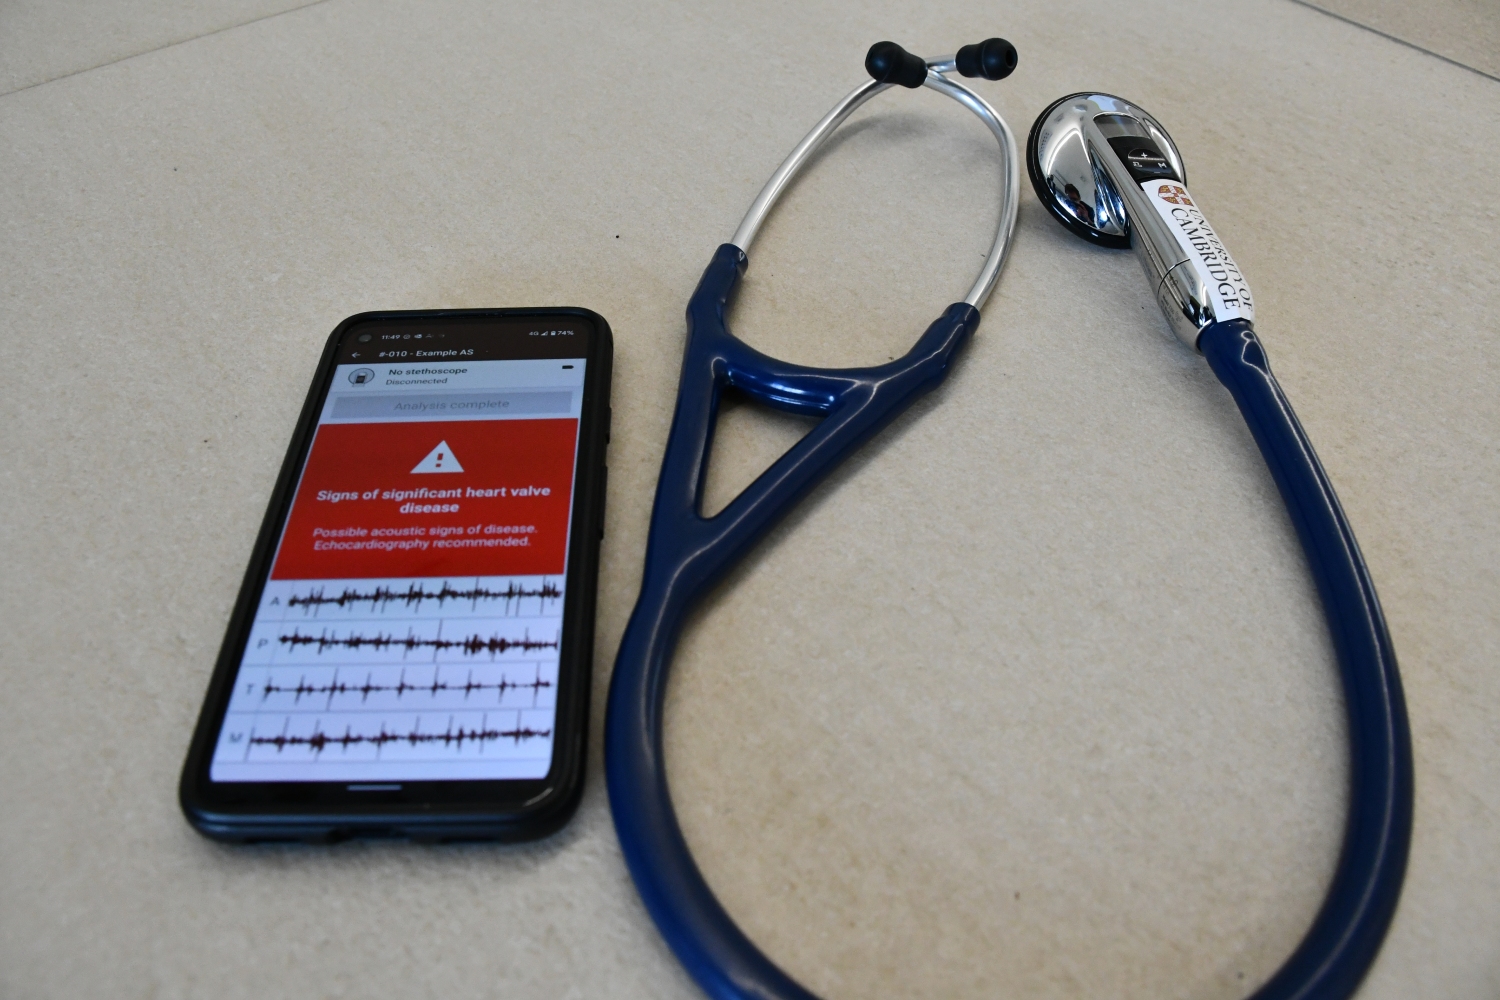 A smartphone screen next to a stethoscope shows sound recording wave patterns and a red banner saying 'signs of significant heart valve disease'.